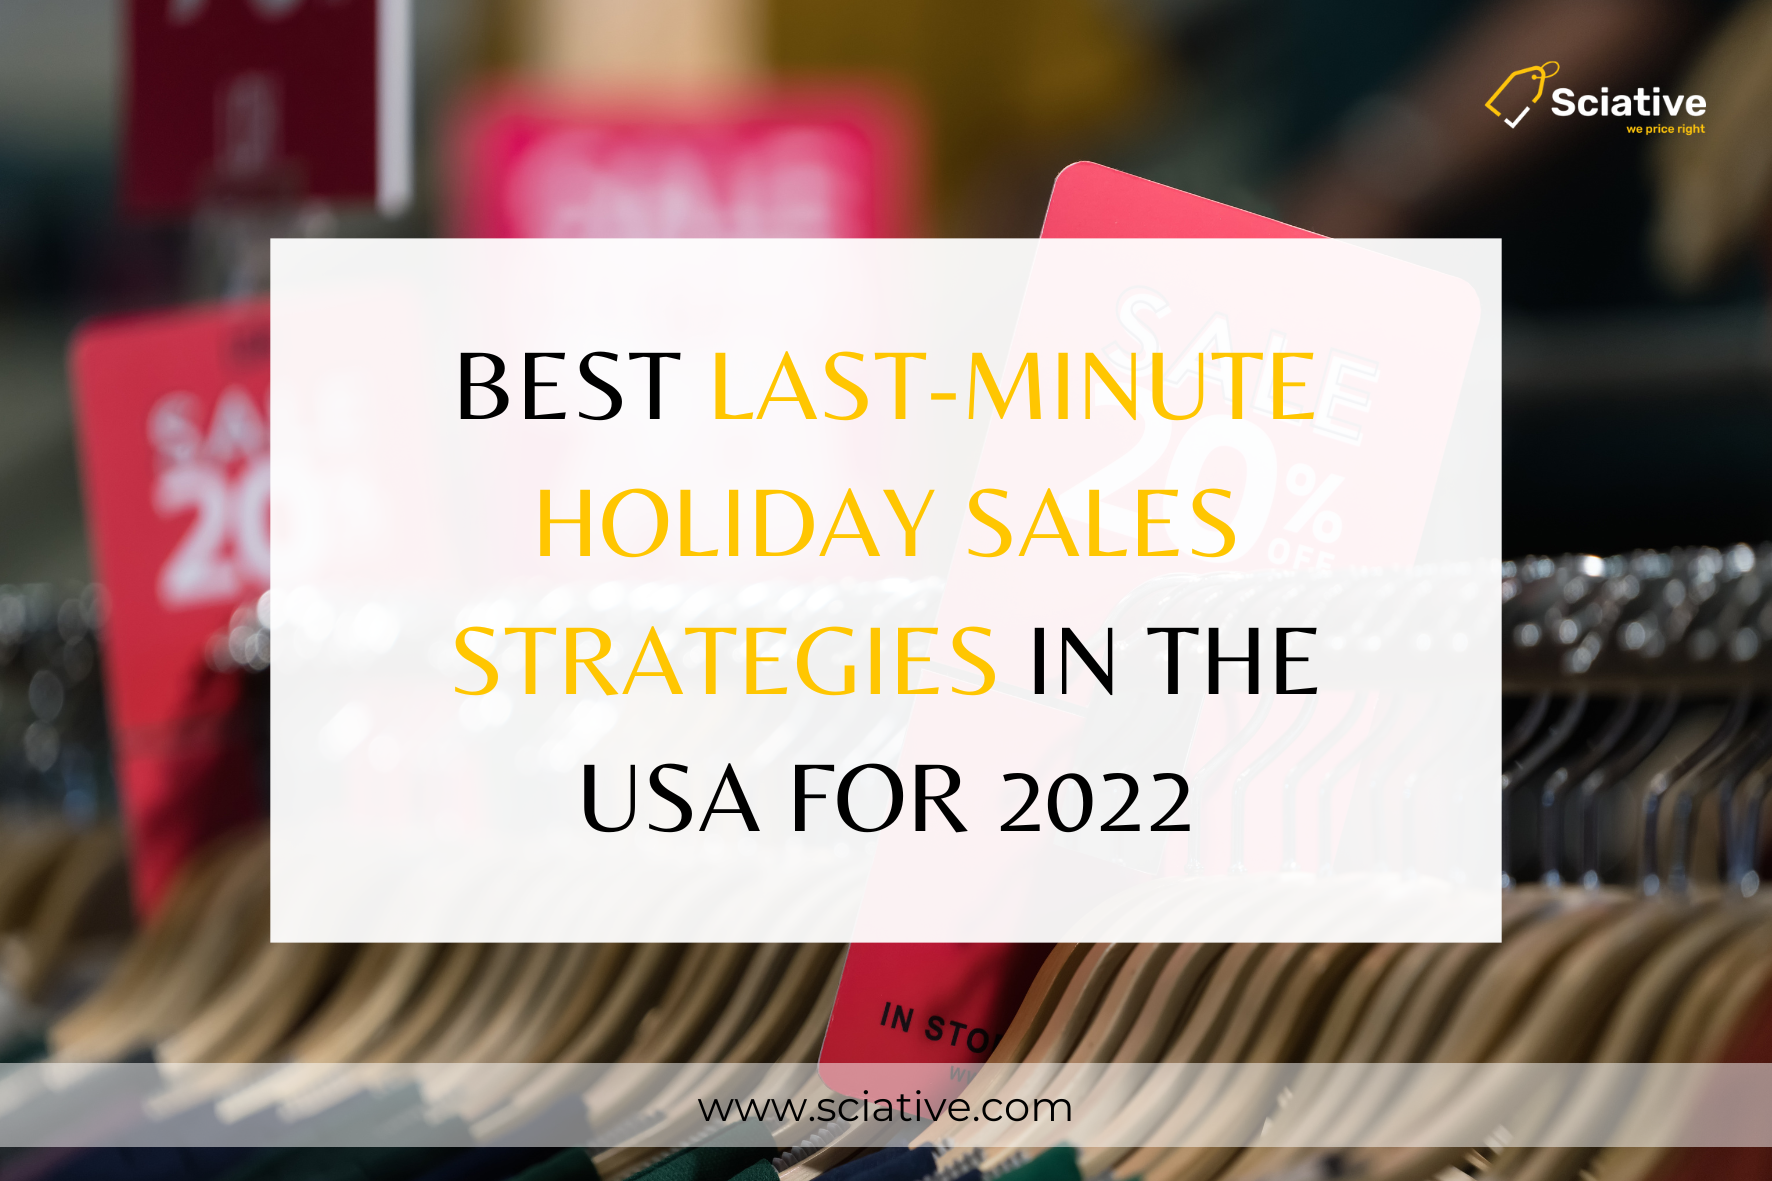 Best Last-Minute Holiday Sales Strategies in the USA for 2022